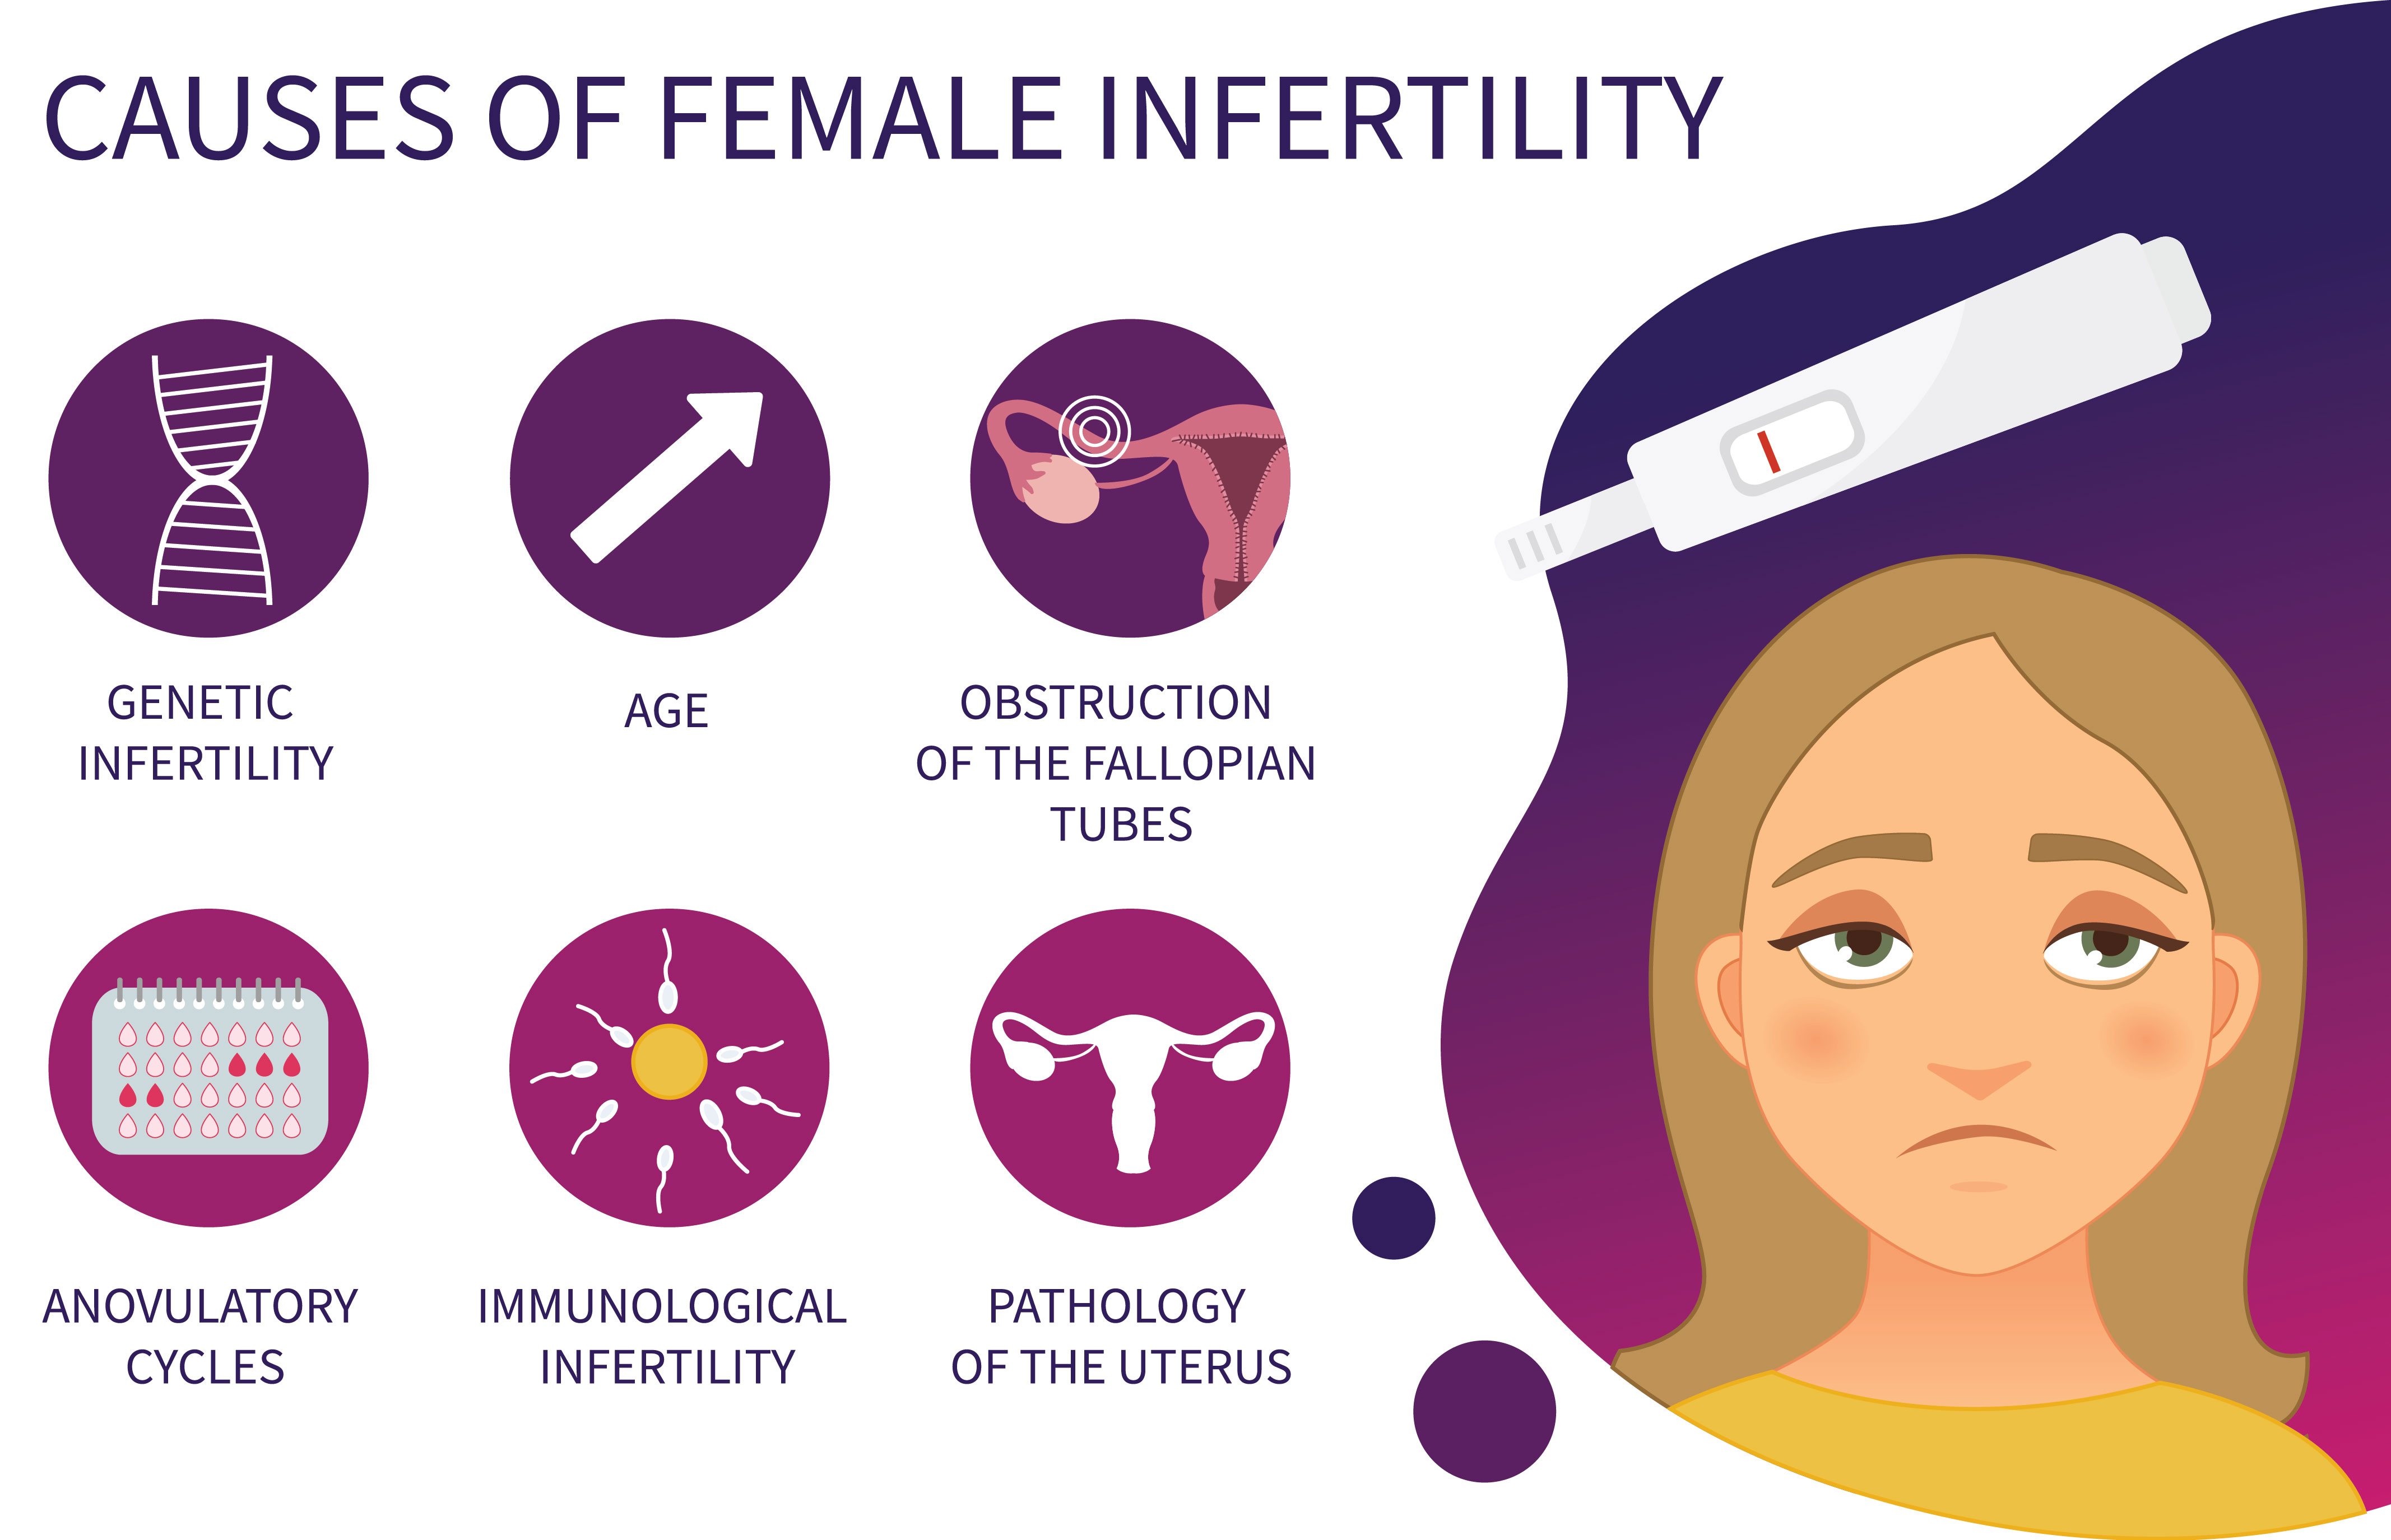 Causes of women’s infertility